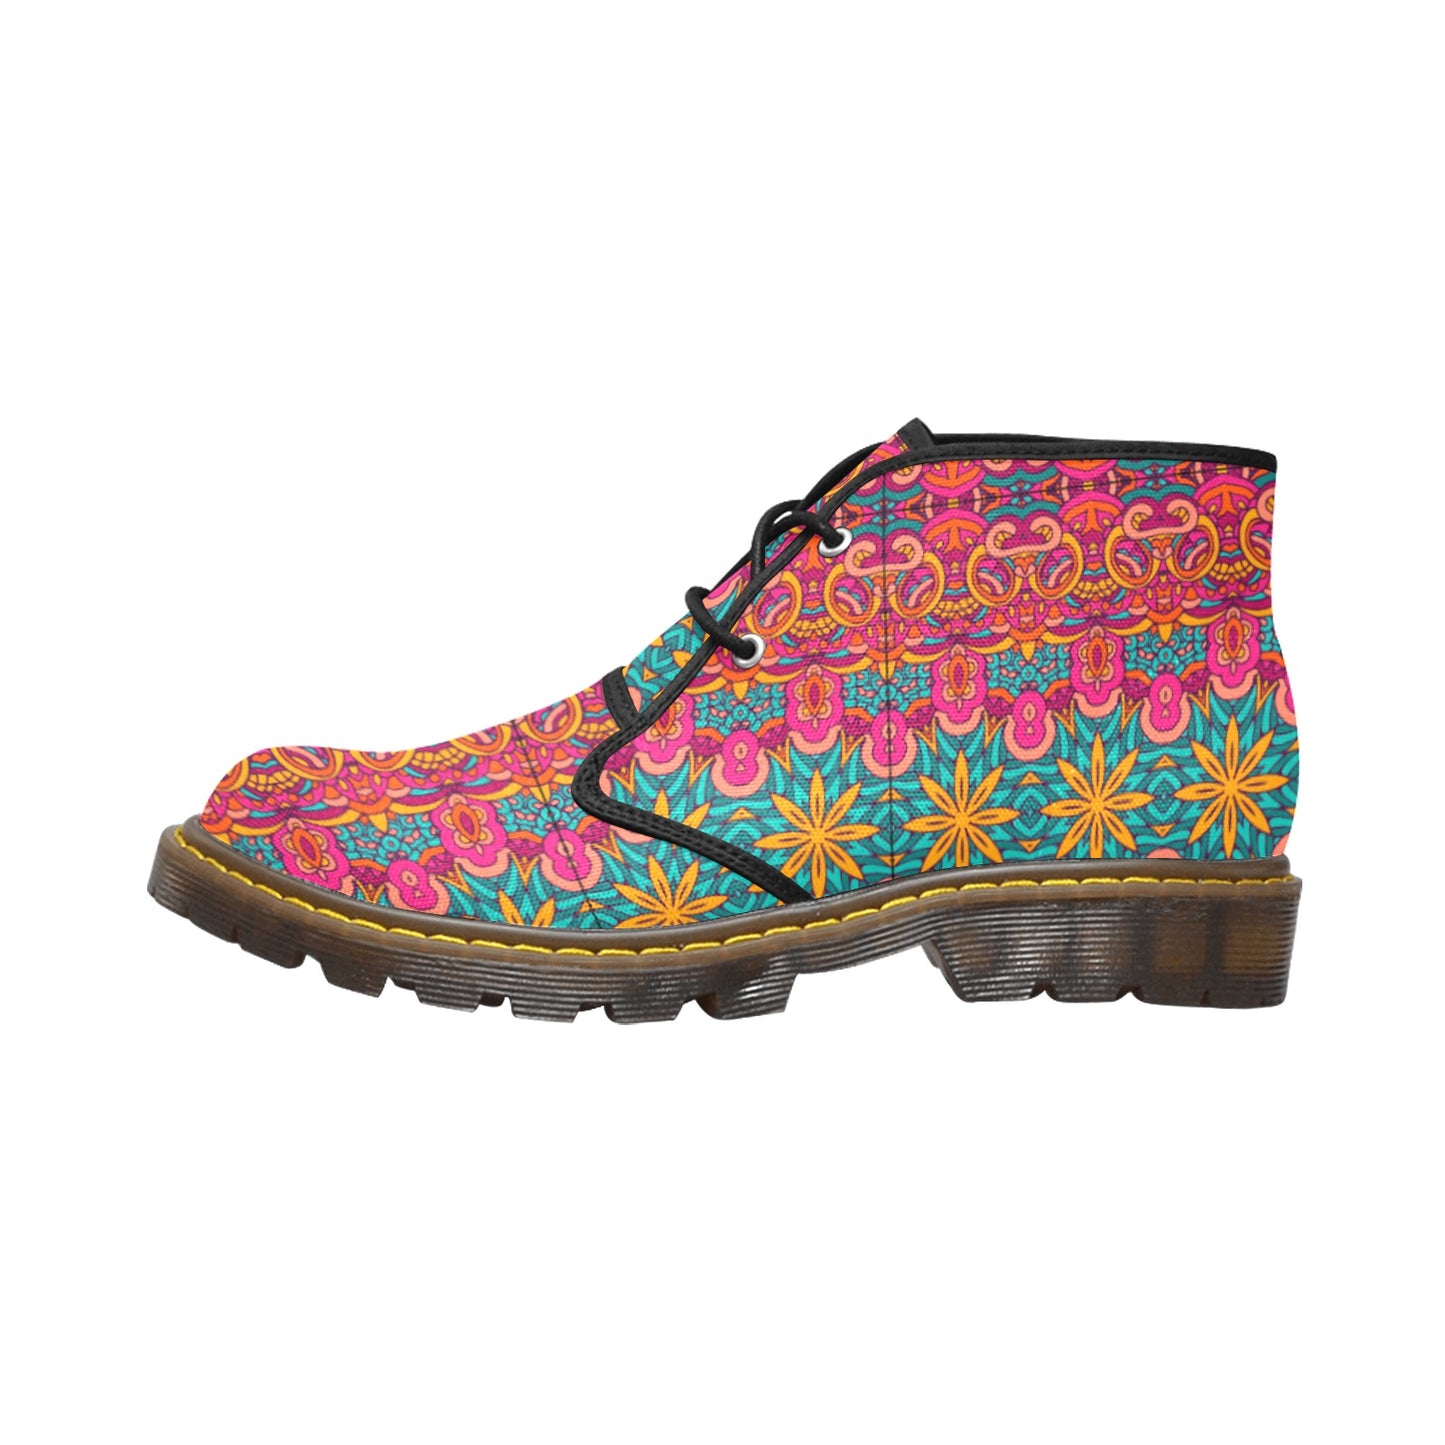 Canvas Ankle Boot - Boho yellow flower